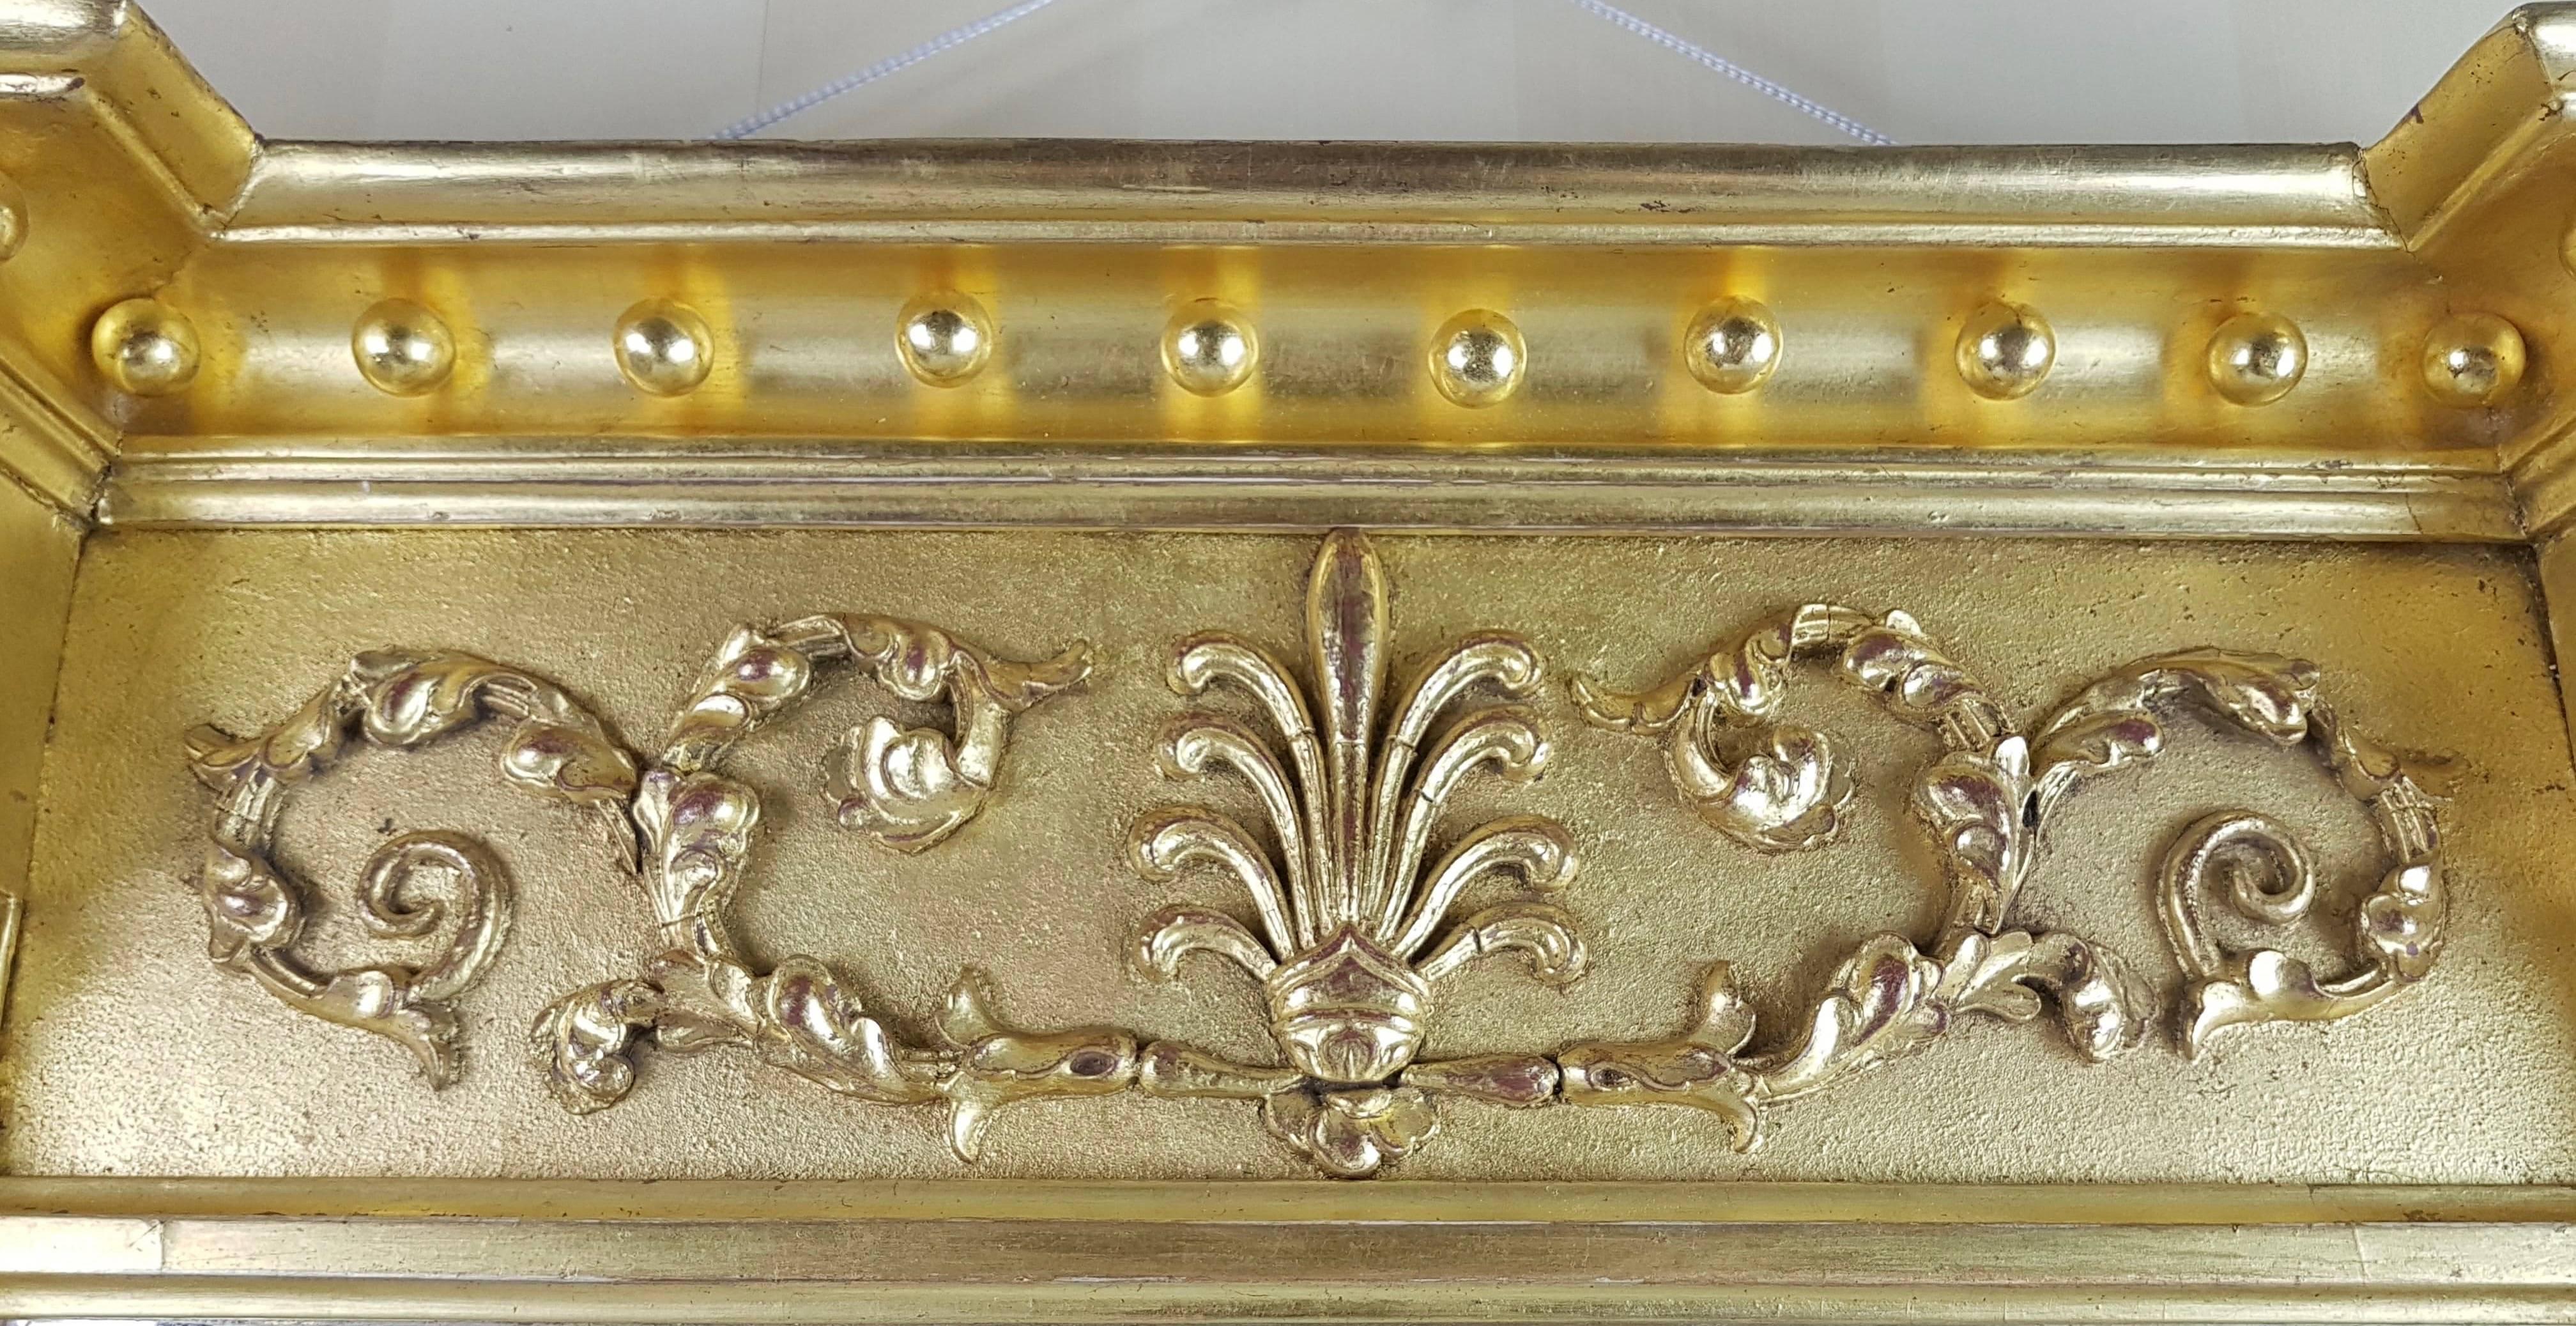 Regency pier glass mirror with raised and decorated pilasters and frieze with raised foliage decoration on a matte ground with burnished highlights. Water gilded in 22-carat English gold leaf. 

This item is on display in Berkshire - UK.